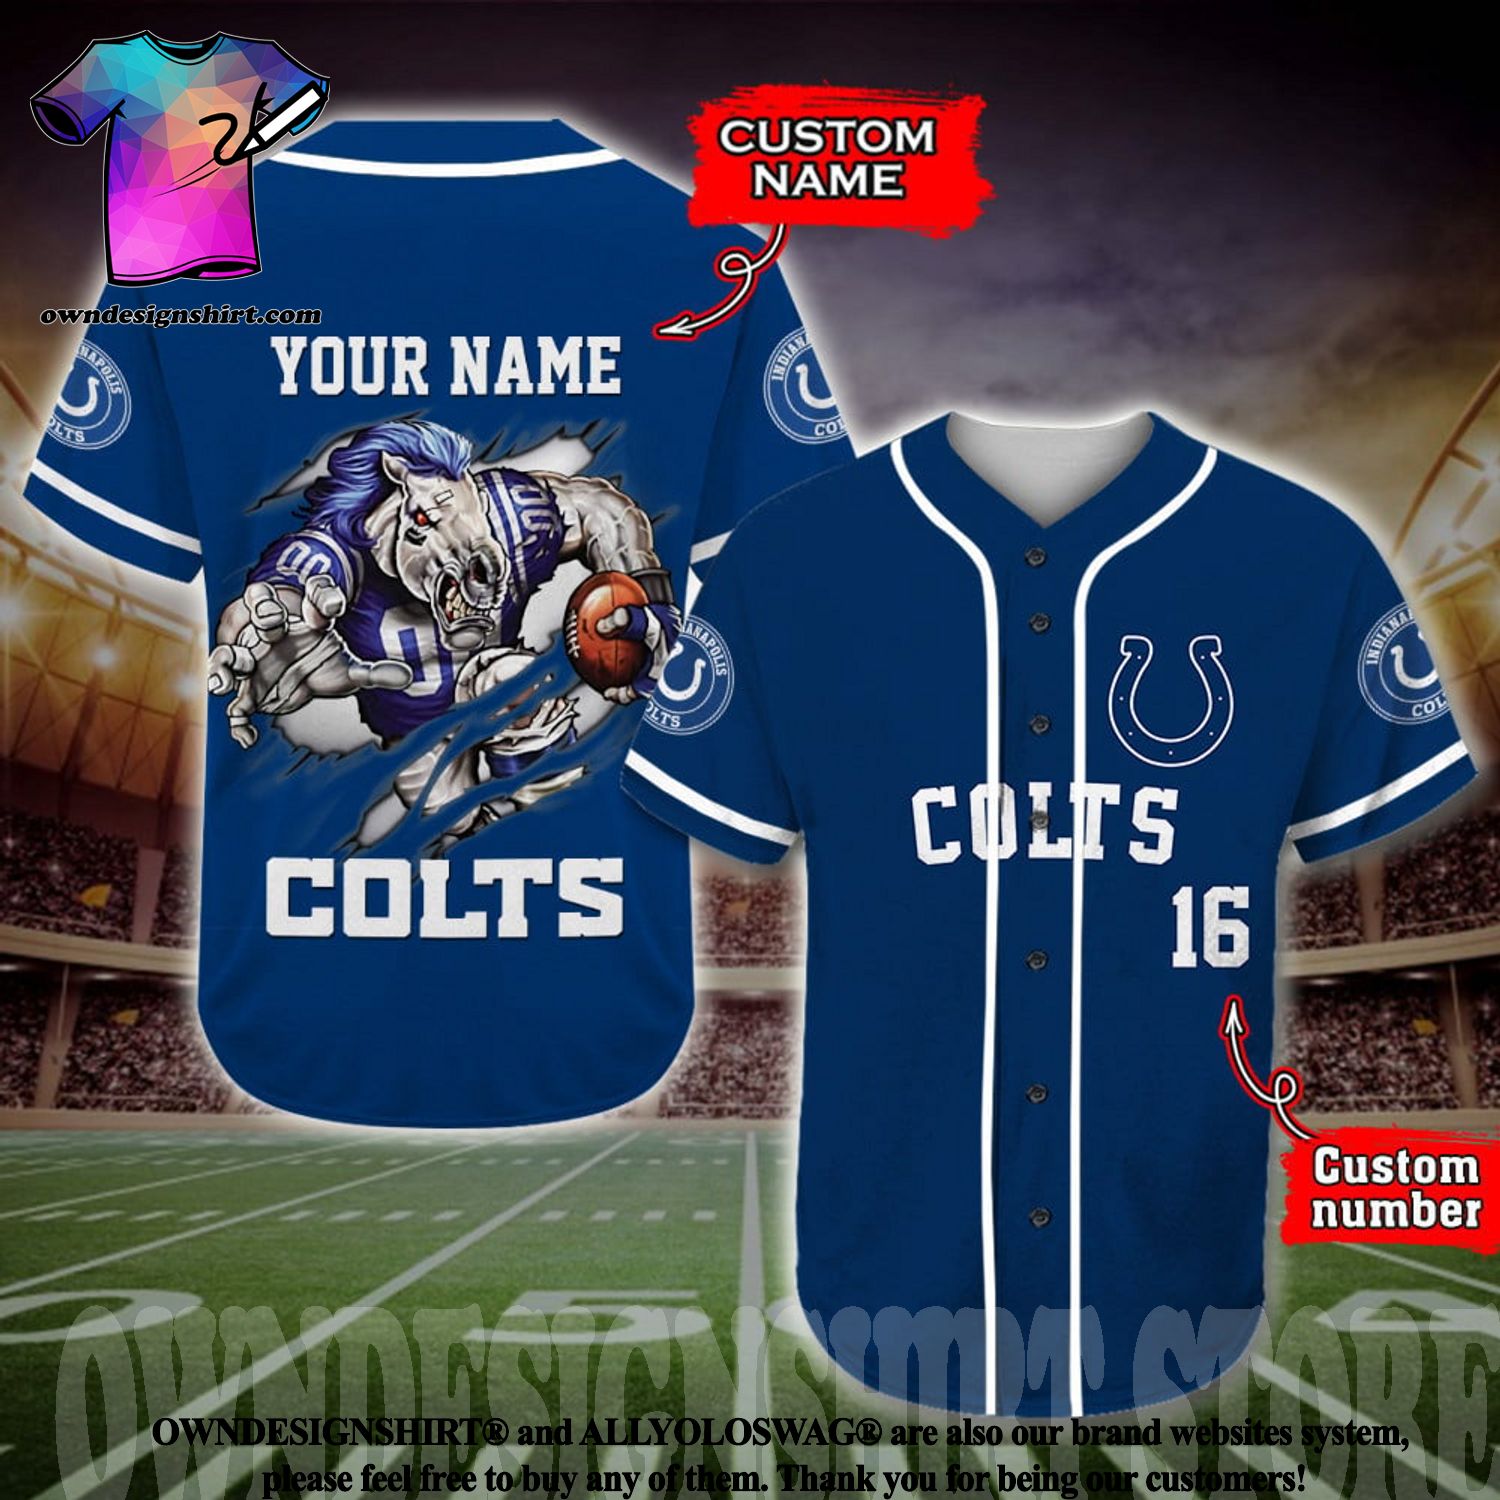 jersey indianapolis colts